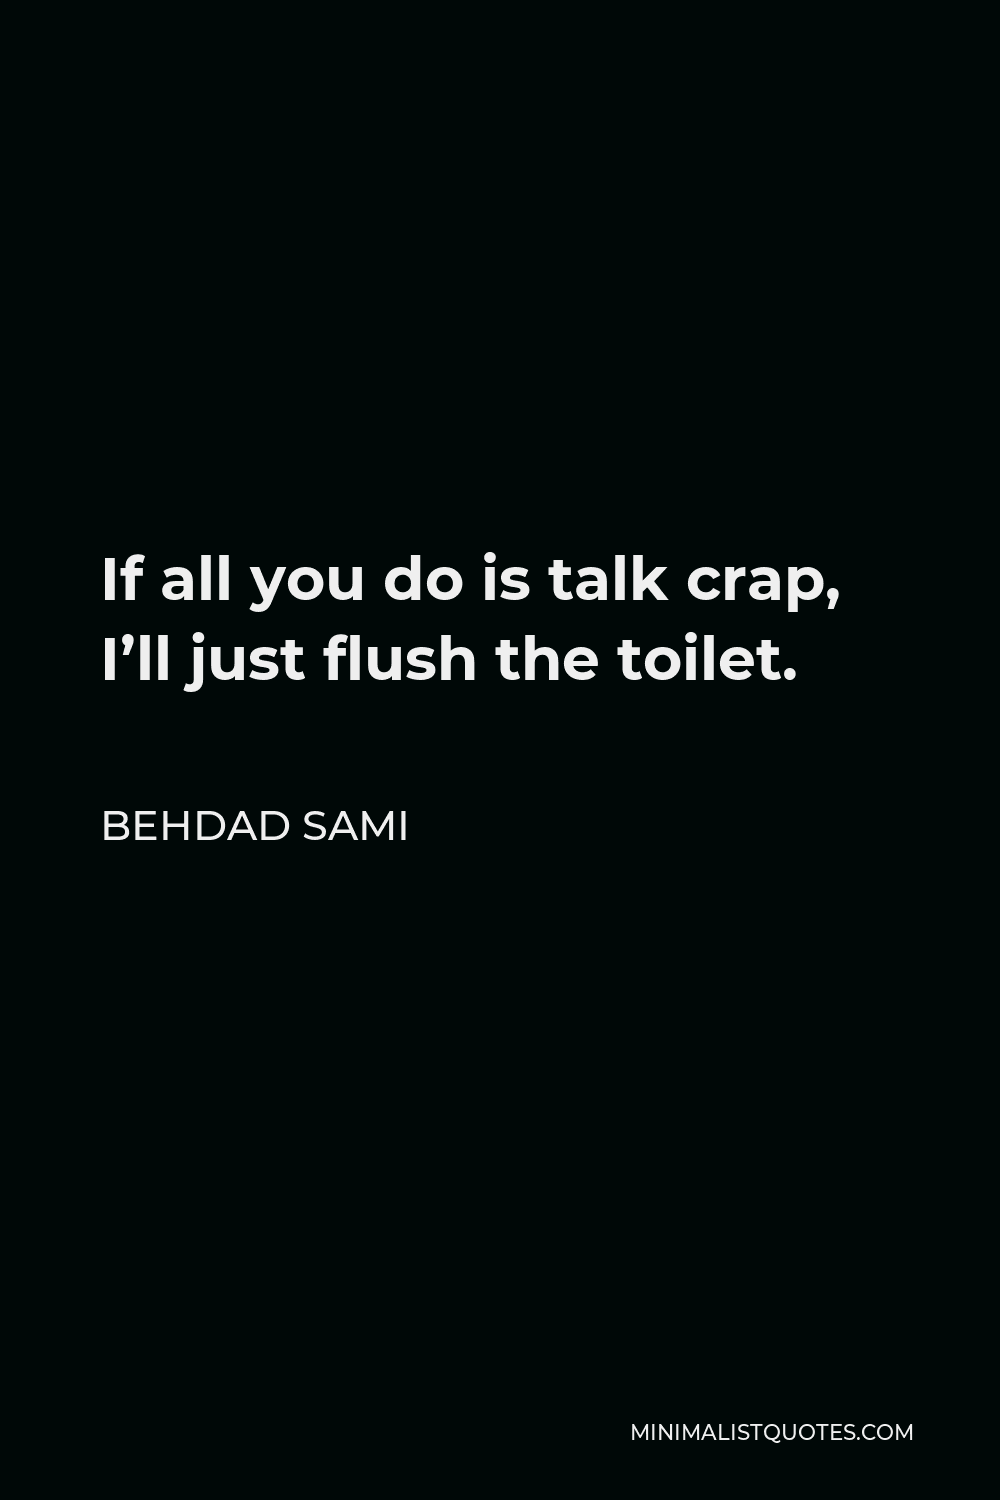 Behdad Sami Quote - If all you do is talk crap, I’ll just flush the toilet.